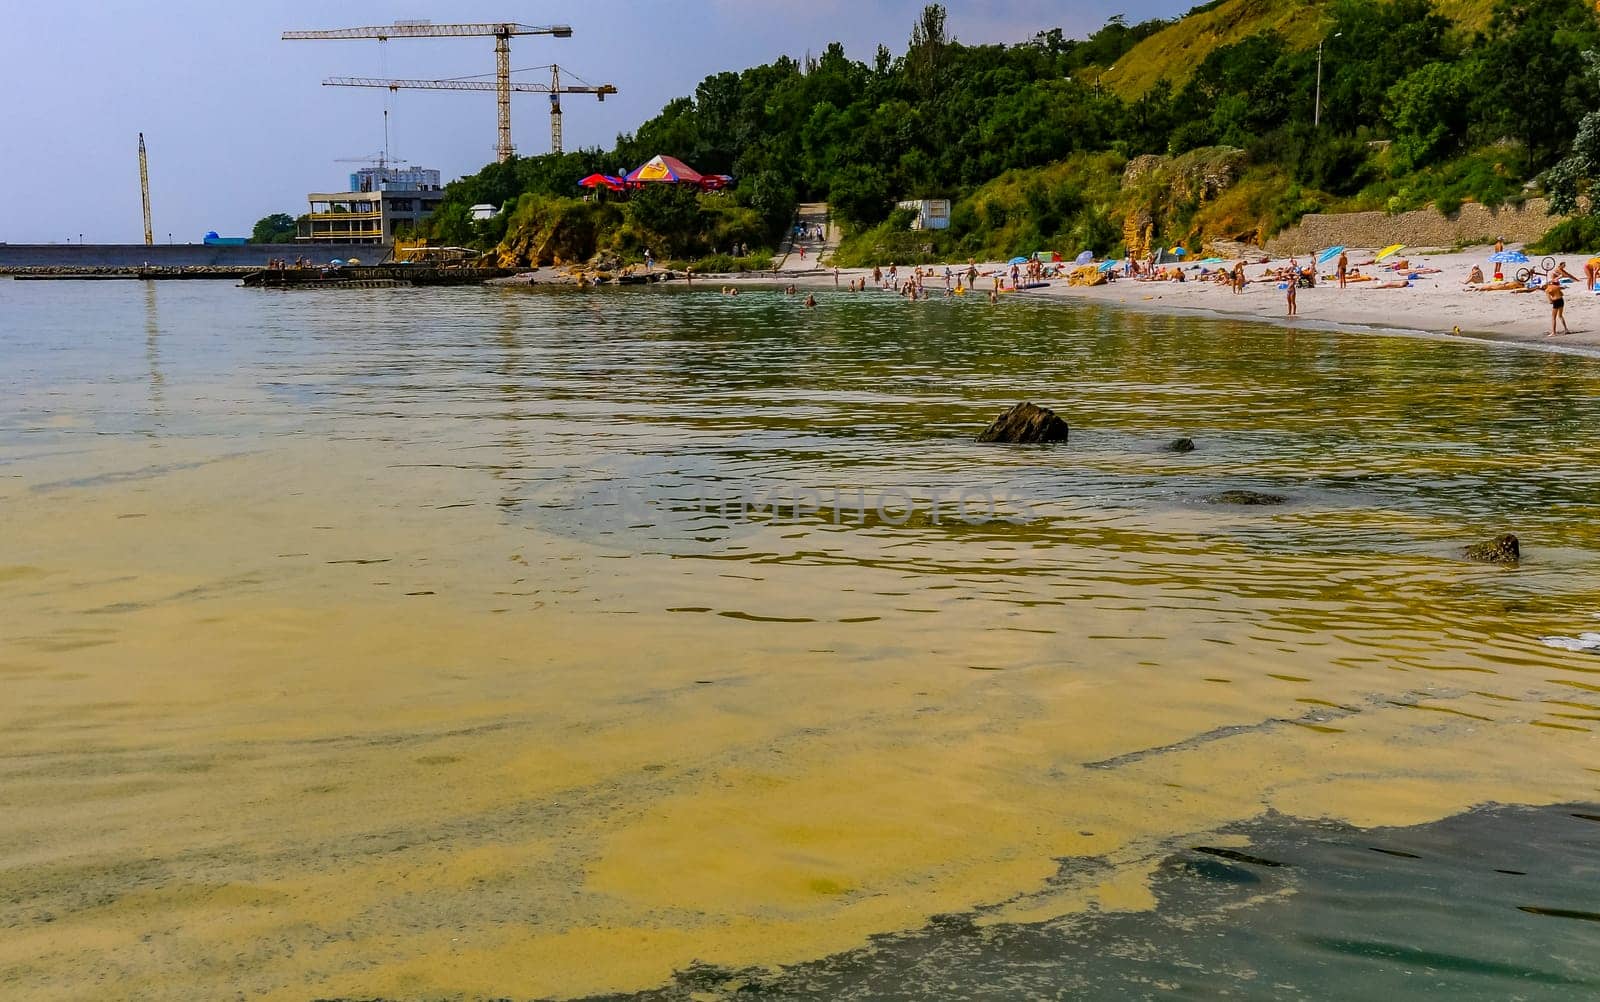 (Nodularia spumigena), ecological disaster, a toxic blue-green algae bloom in the Black Sea by Hydrobiolog